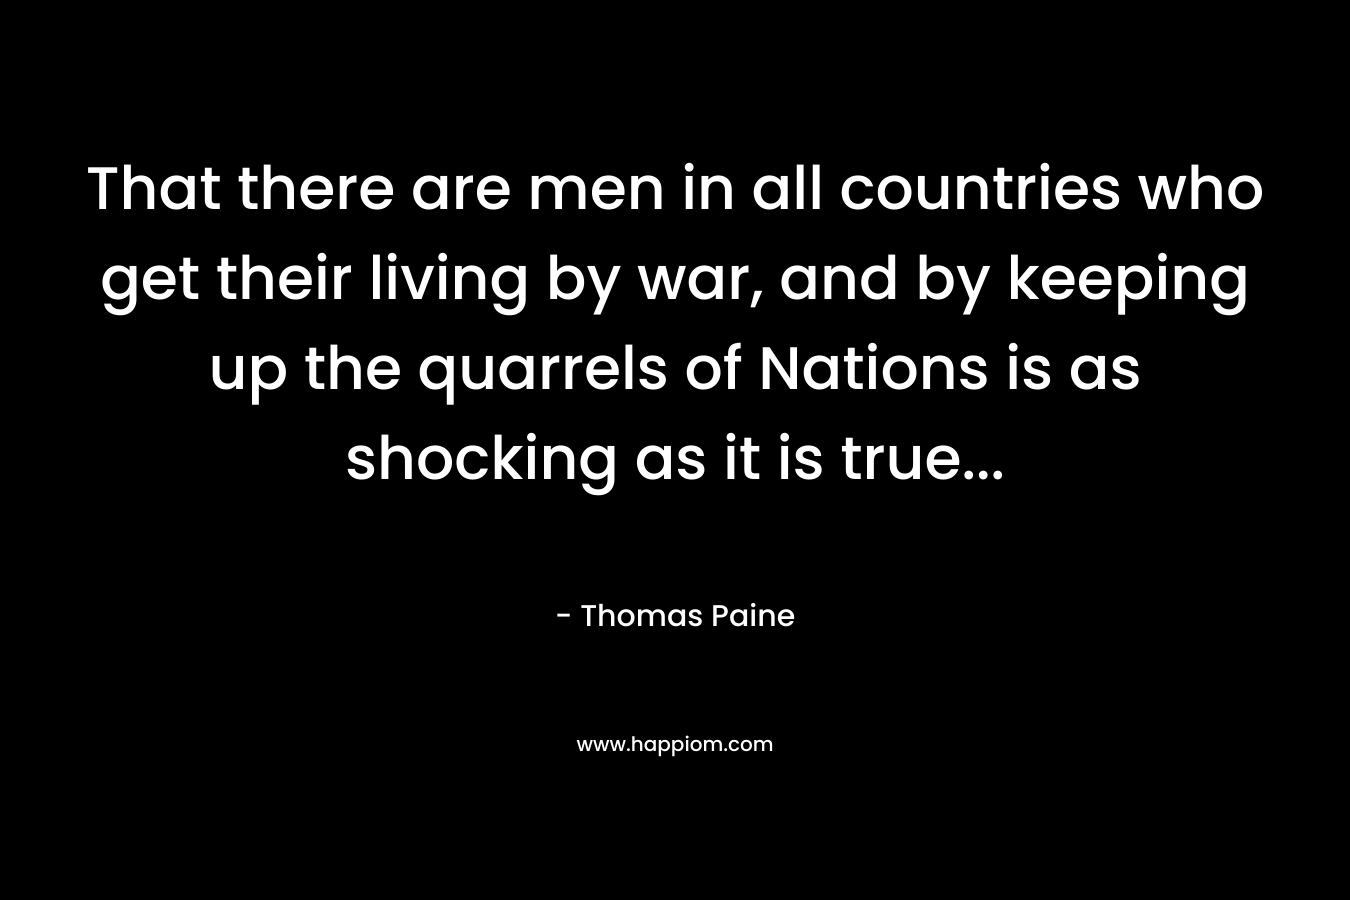 That there are men in all countries who get their living by war, and by keeping up the quarrels of Nations is as shocking as it is true… – Thomas Paine